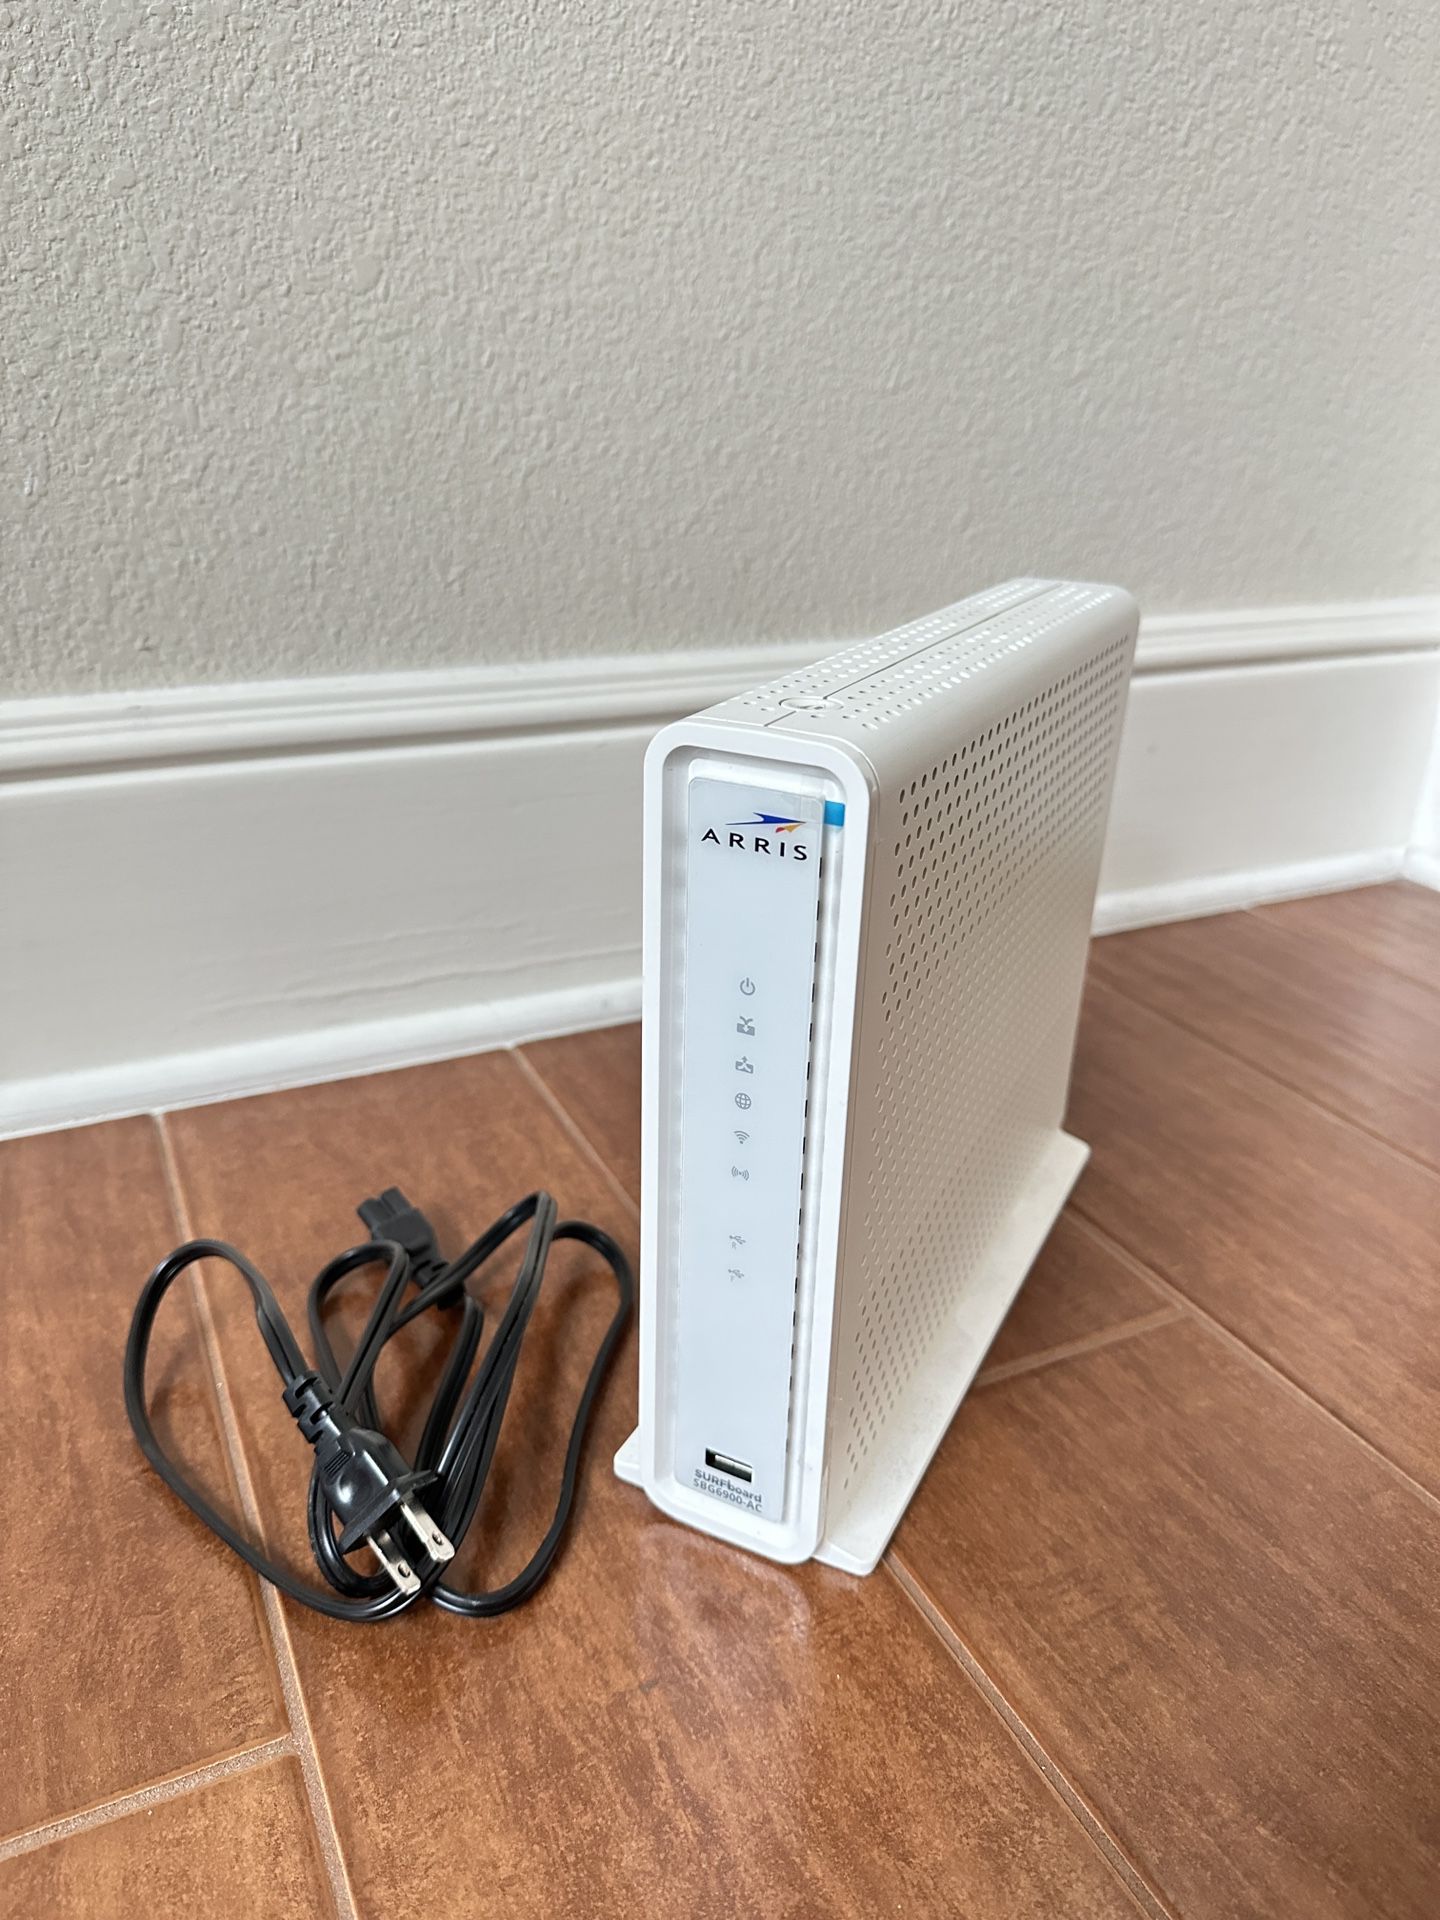 *Like New* Arris Surfboard SBG6900AC Modem Router Combo - Spectrum And Other Internet Provider Approved 